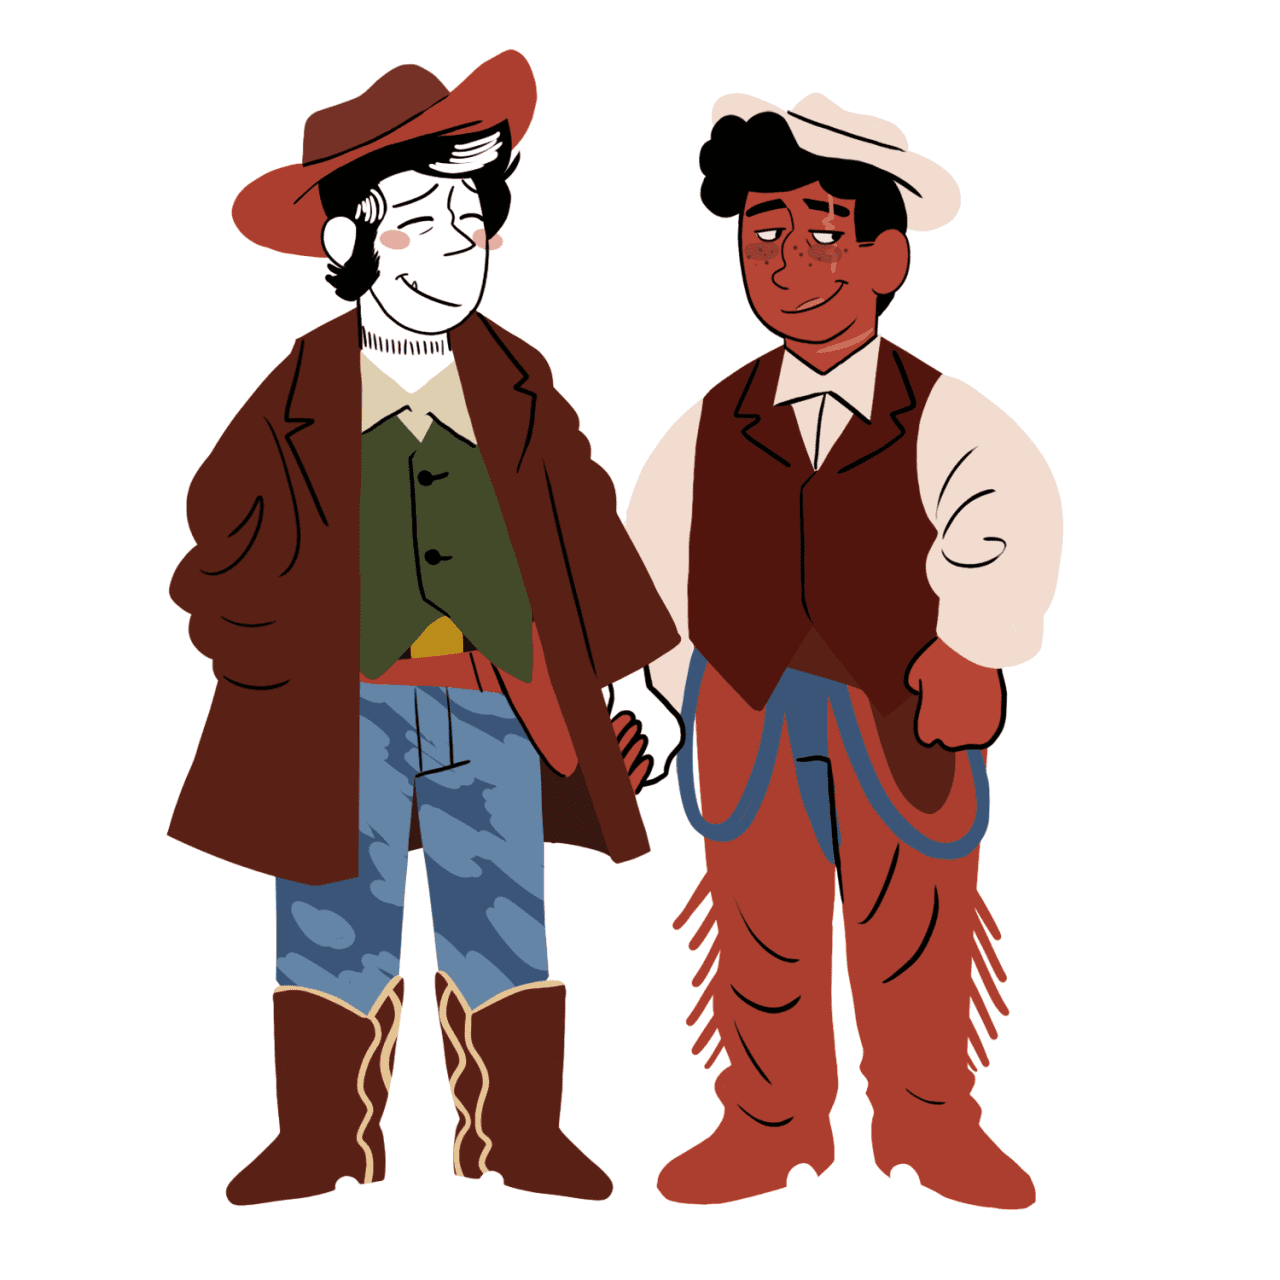 Oscar and Ulysses, two cowboys, hold hands with flustered smiles. Oscar is a long-faced pale man with half-white hair and sutures around his neck. He's clad with a loose brown duster over usual cowboy garb. Ulysses is a black man with a scar down the left side of his face and on his neck. His black curly hair poofs out the front from under his hat. They are drawn in a somewhat-retro toony style.